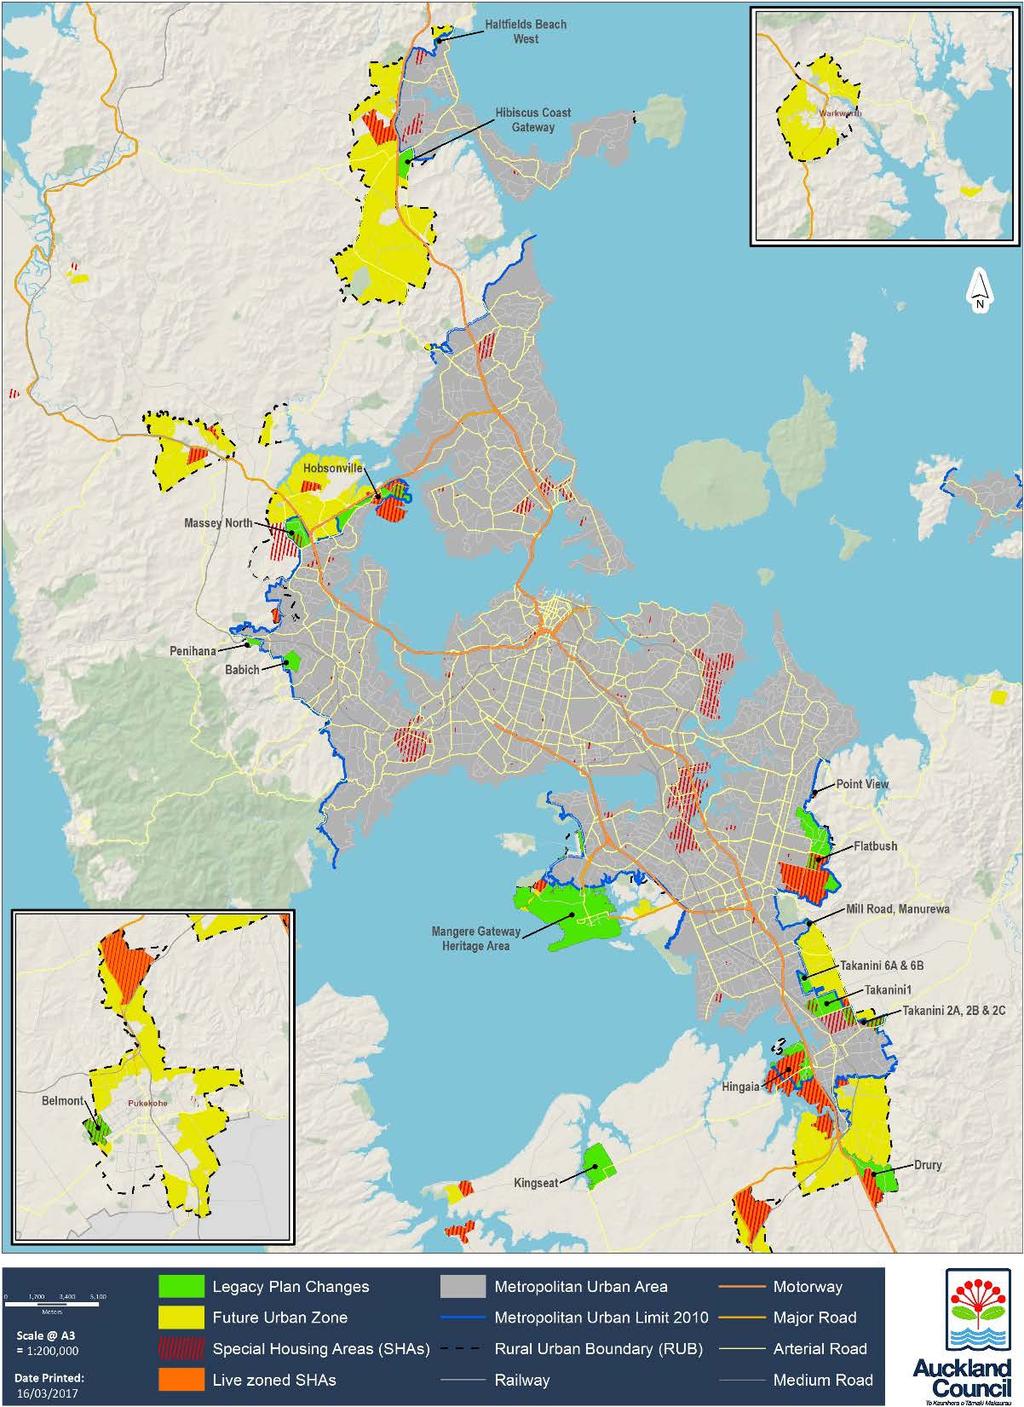 Greenfield land supply The Future Urban Zone (FUZ) in the Auckland Unitary Plan provides over 30 years of greenfield land supply to 2012-2047.